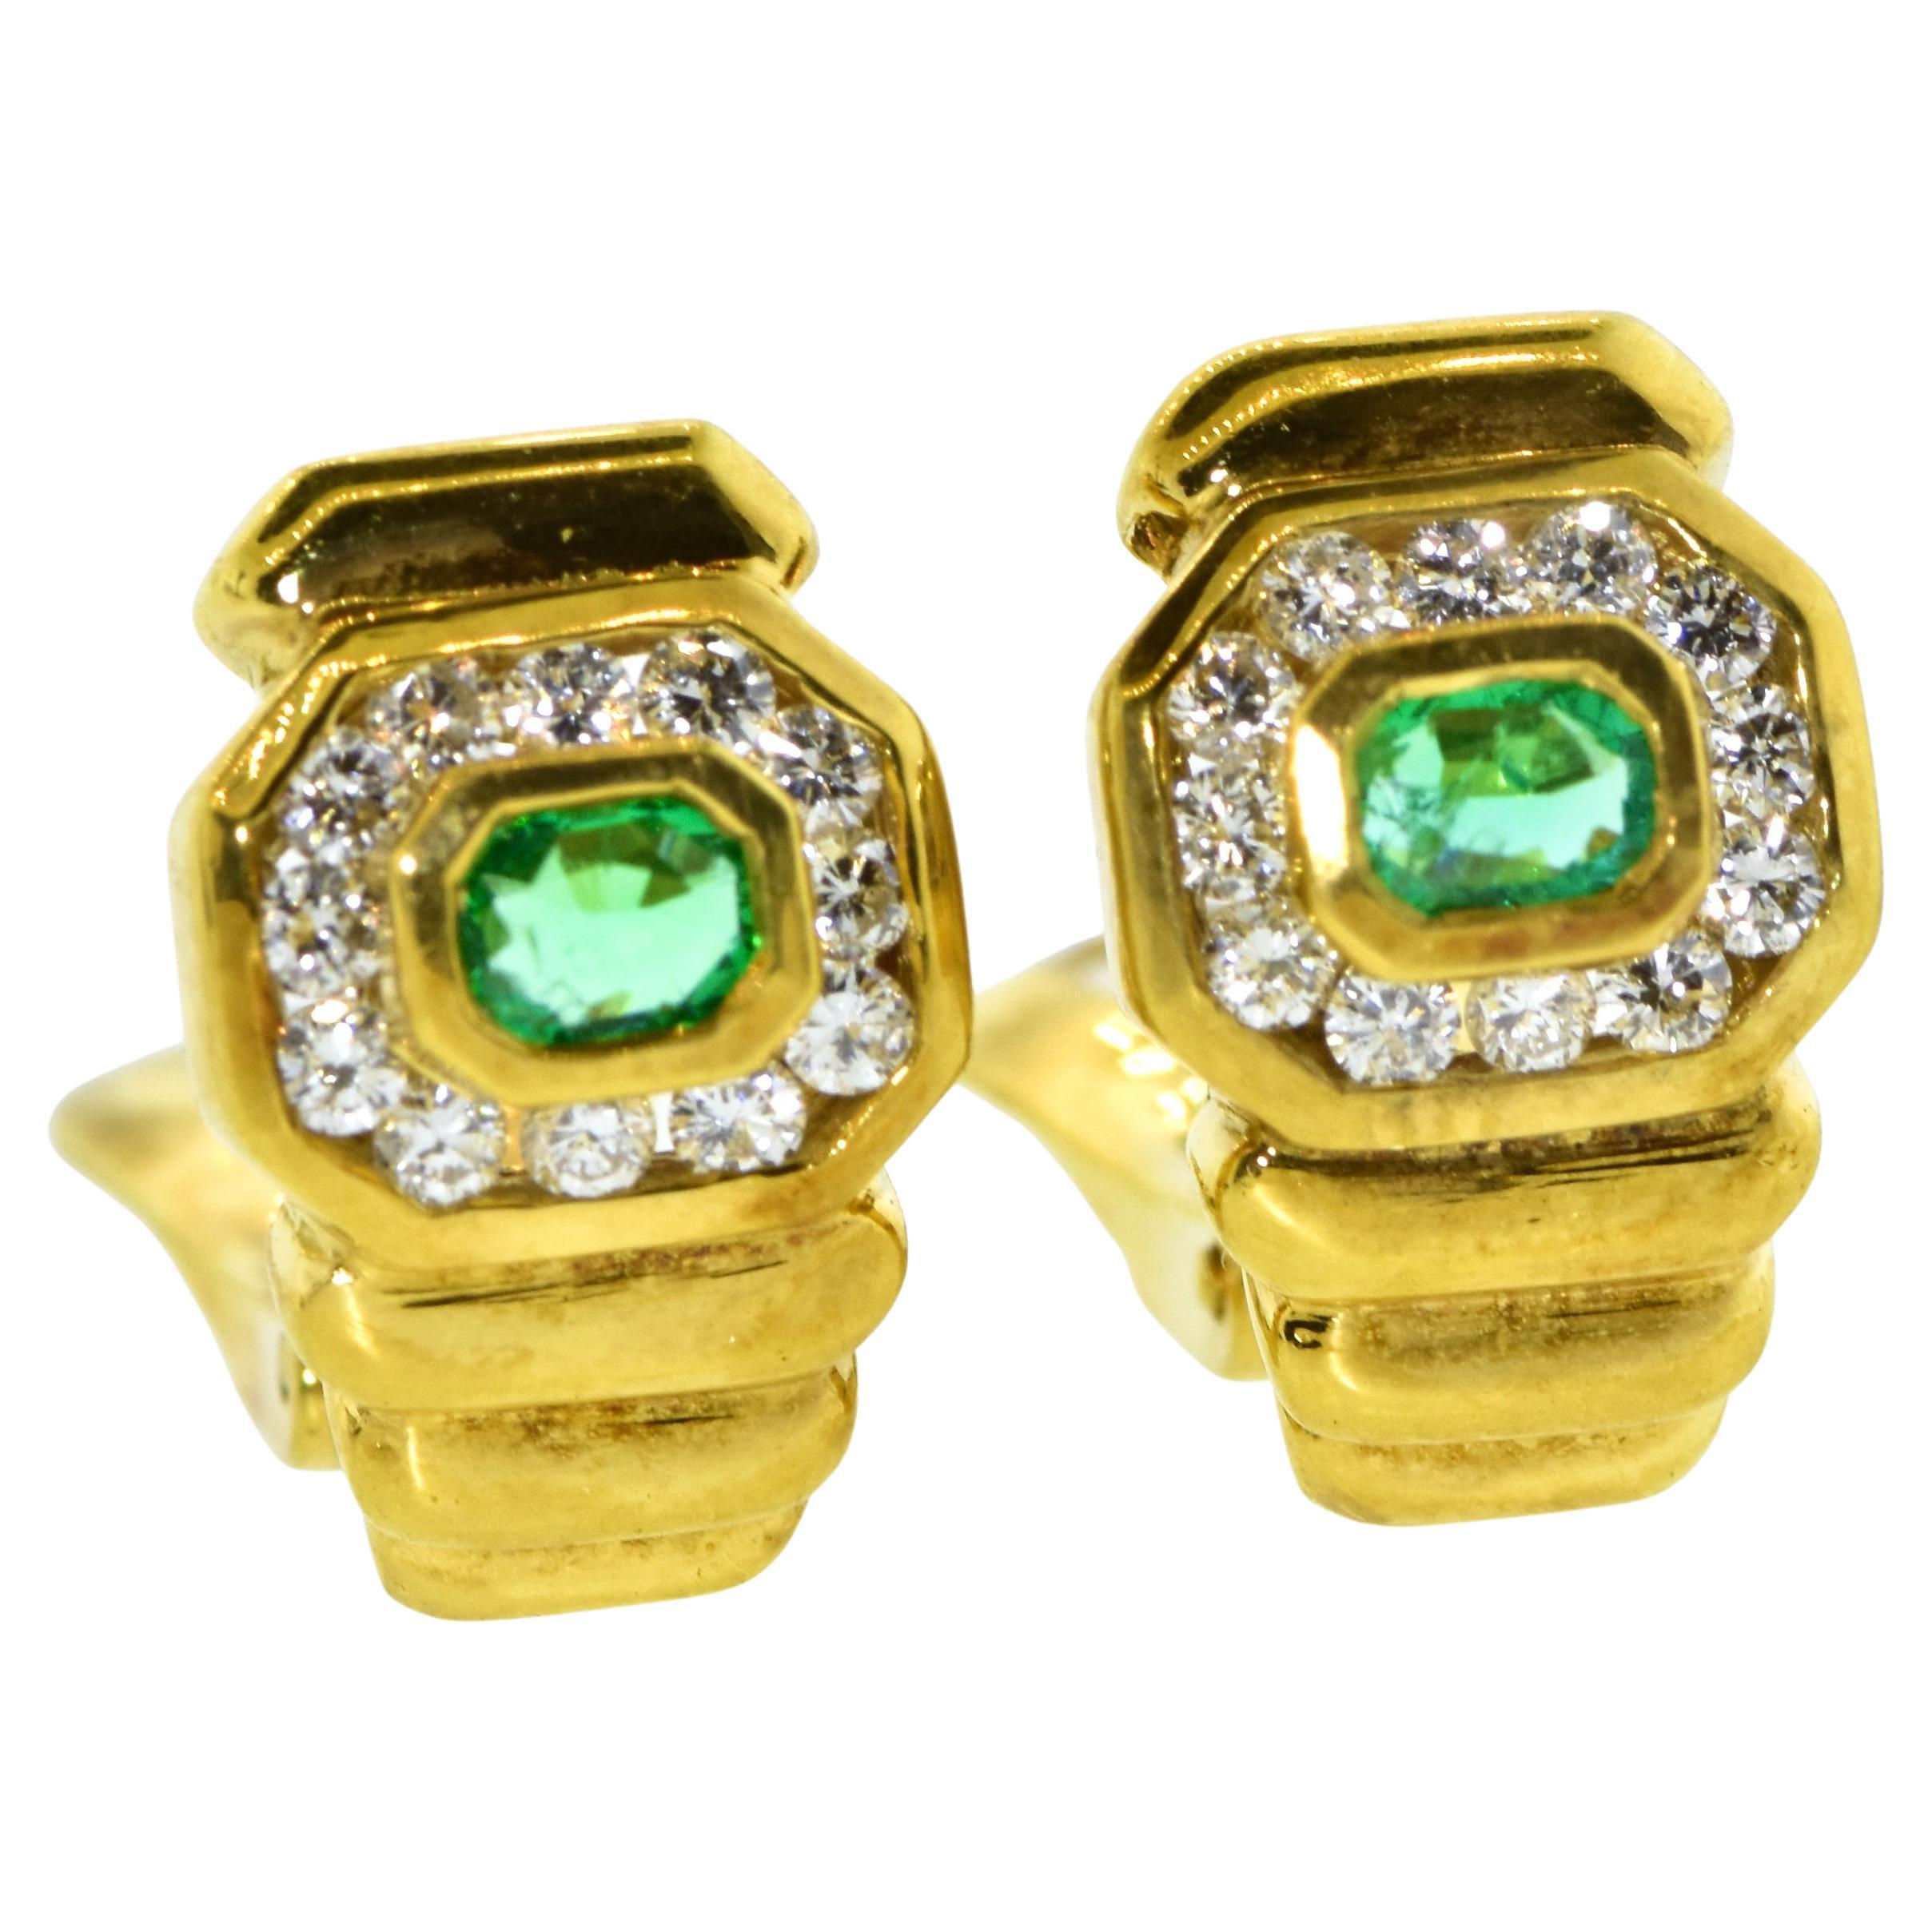 18K Yellow Gold Earrings with Diamond and Emerald